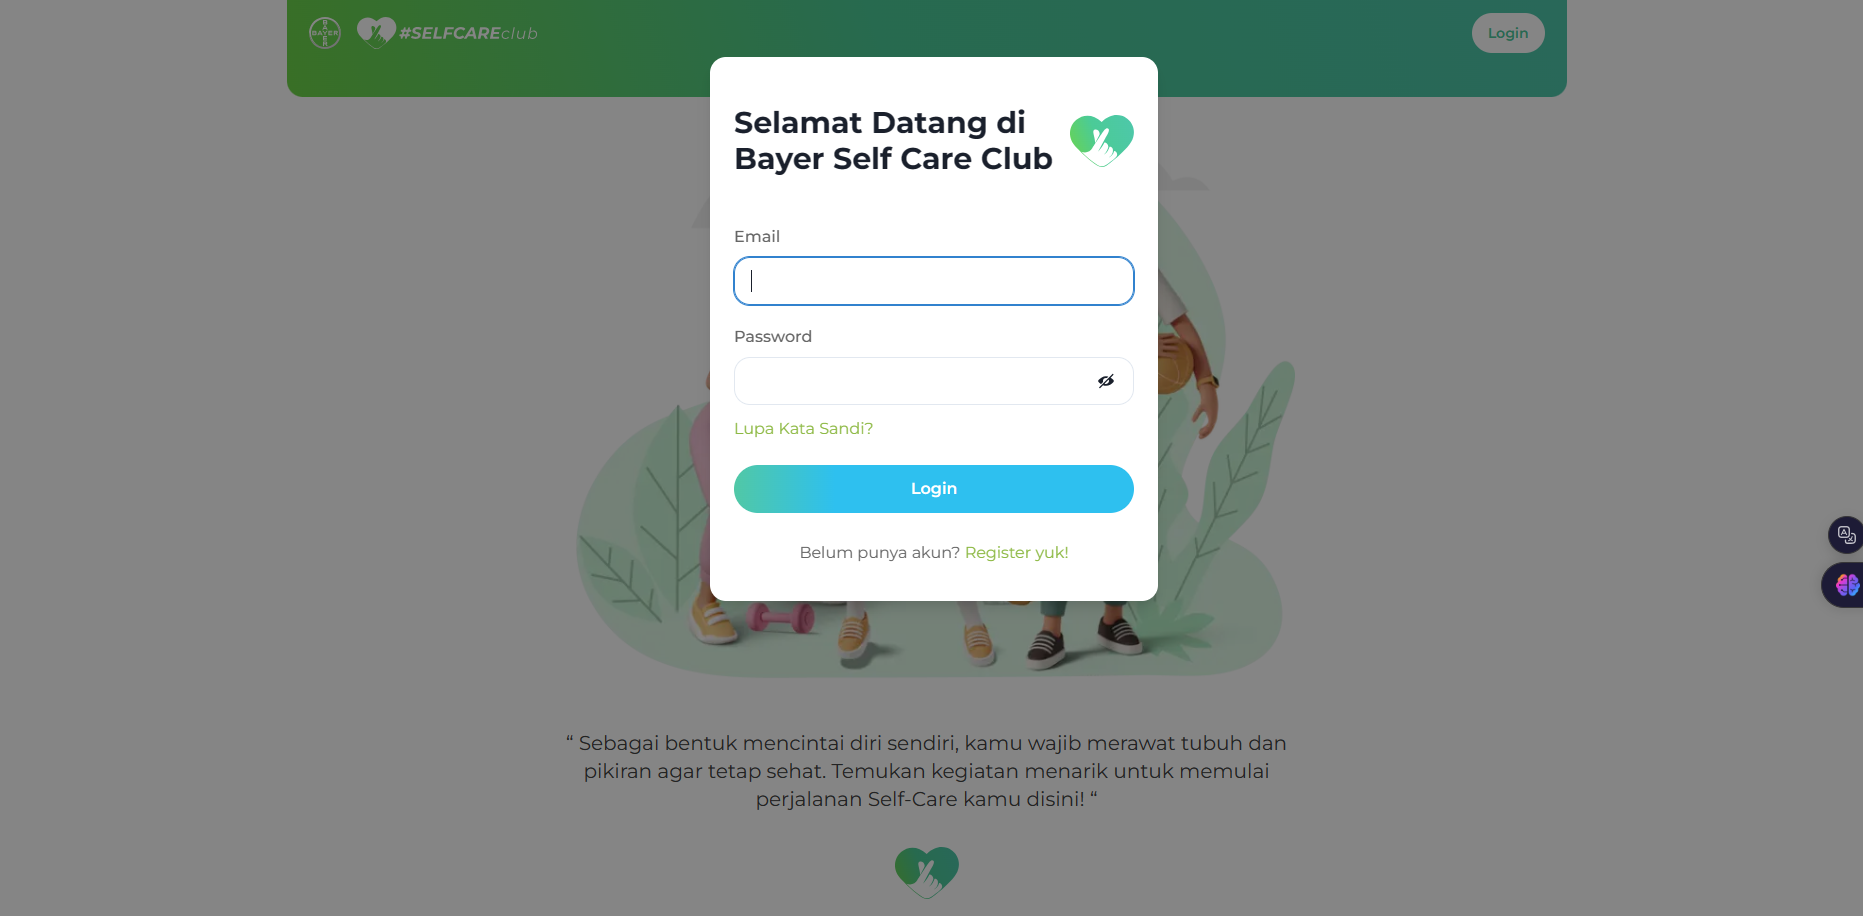 An image of the Bayer Self Care Club project.